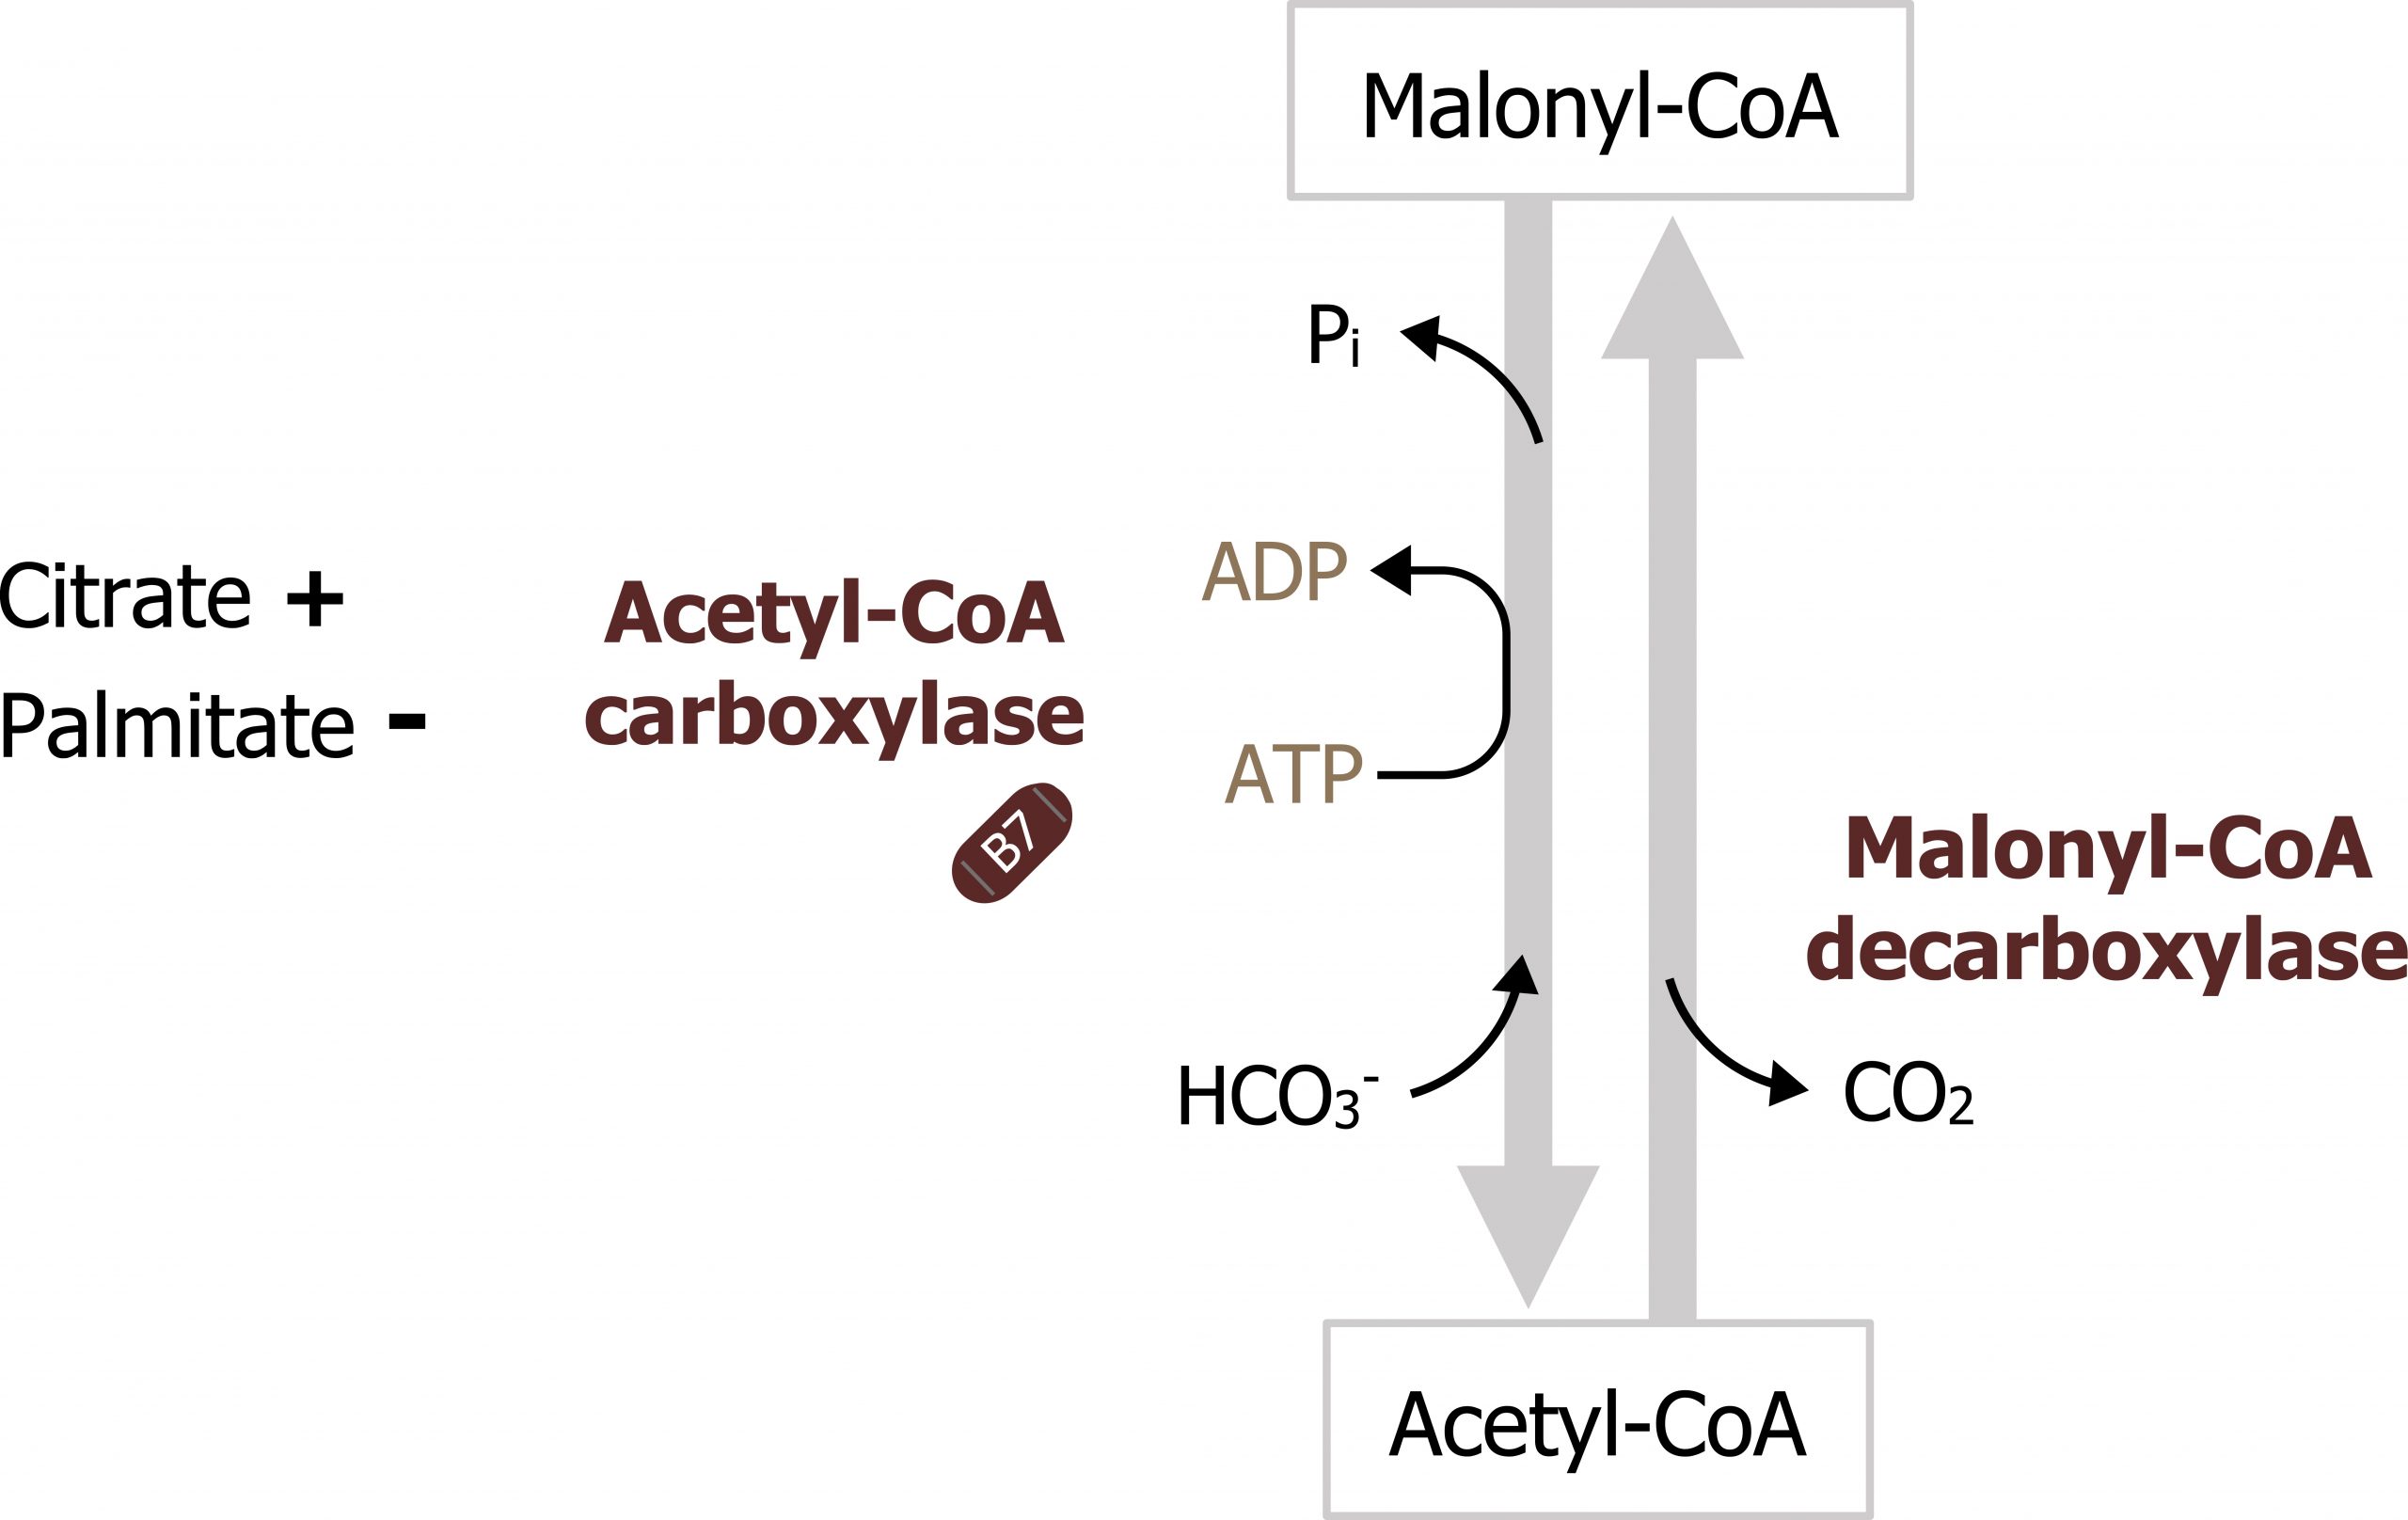 Acetyl CoA upward arrow with enzyme Malonyl CoA decarboxylase and loss of CO2 to Malonyl CoA. Malonyl CoA downward arrow with enzyme acetyl-CoA carboxylase, loss of Pi, ATP arrow ADP, addition of HCO3- to Acetyl CoA. Citrate excites and palmitate inhibits Acetyl-CoA carboxylase.